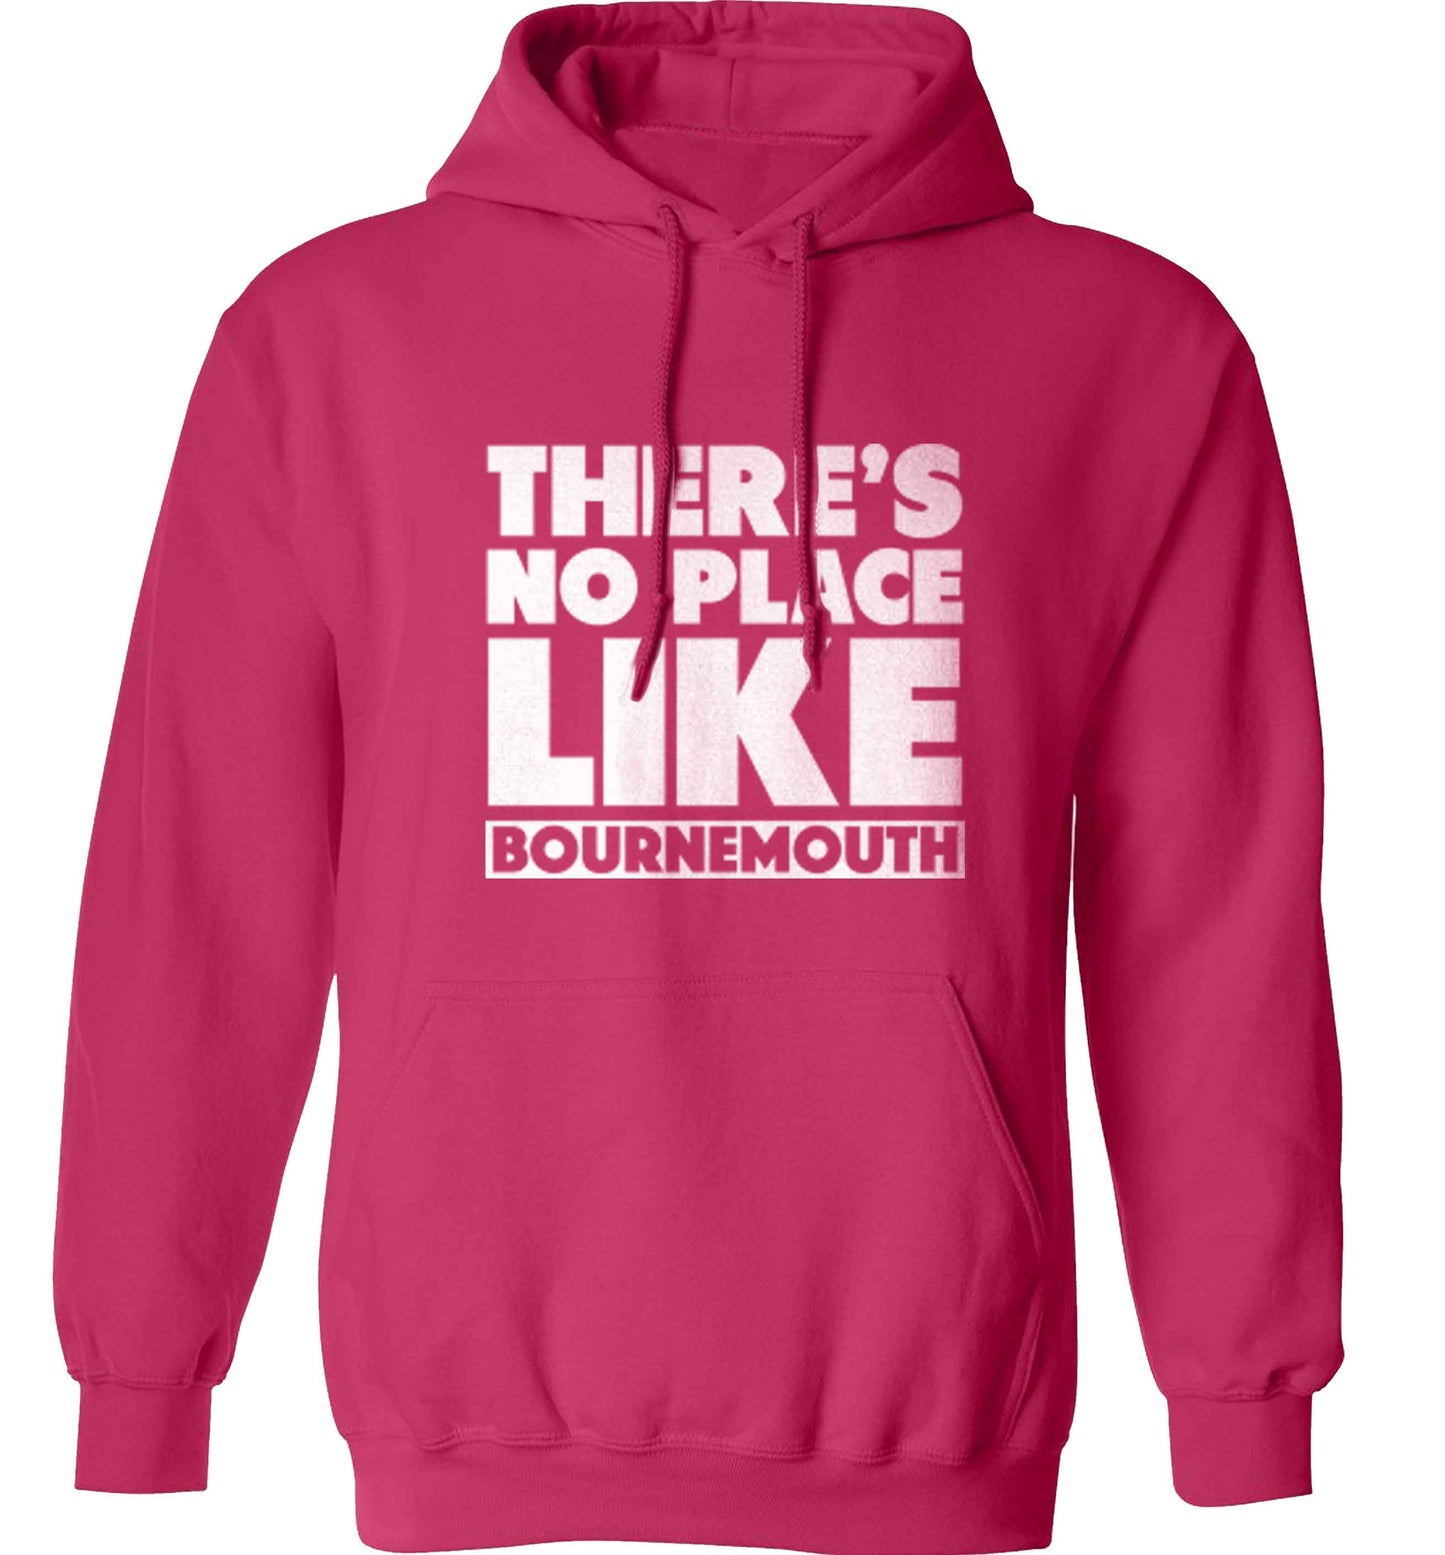 There's no place like Bournemouth adults unisex pink hoodie 2XL